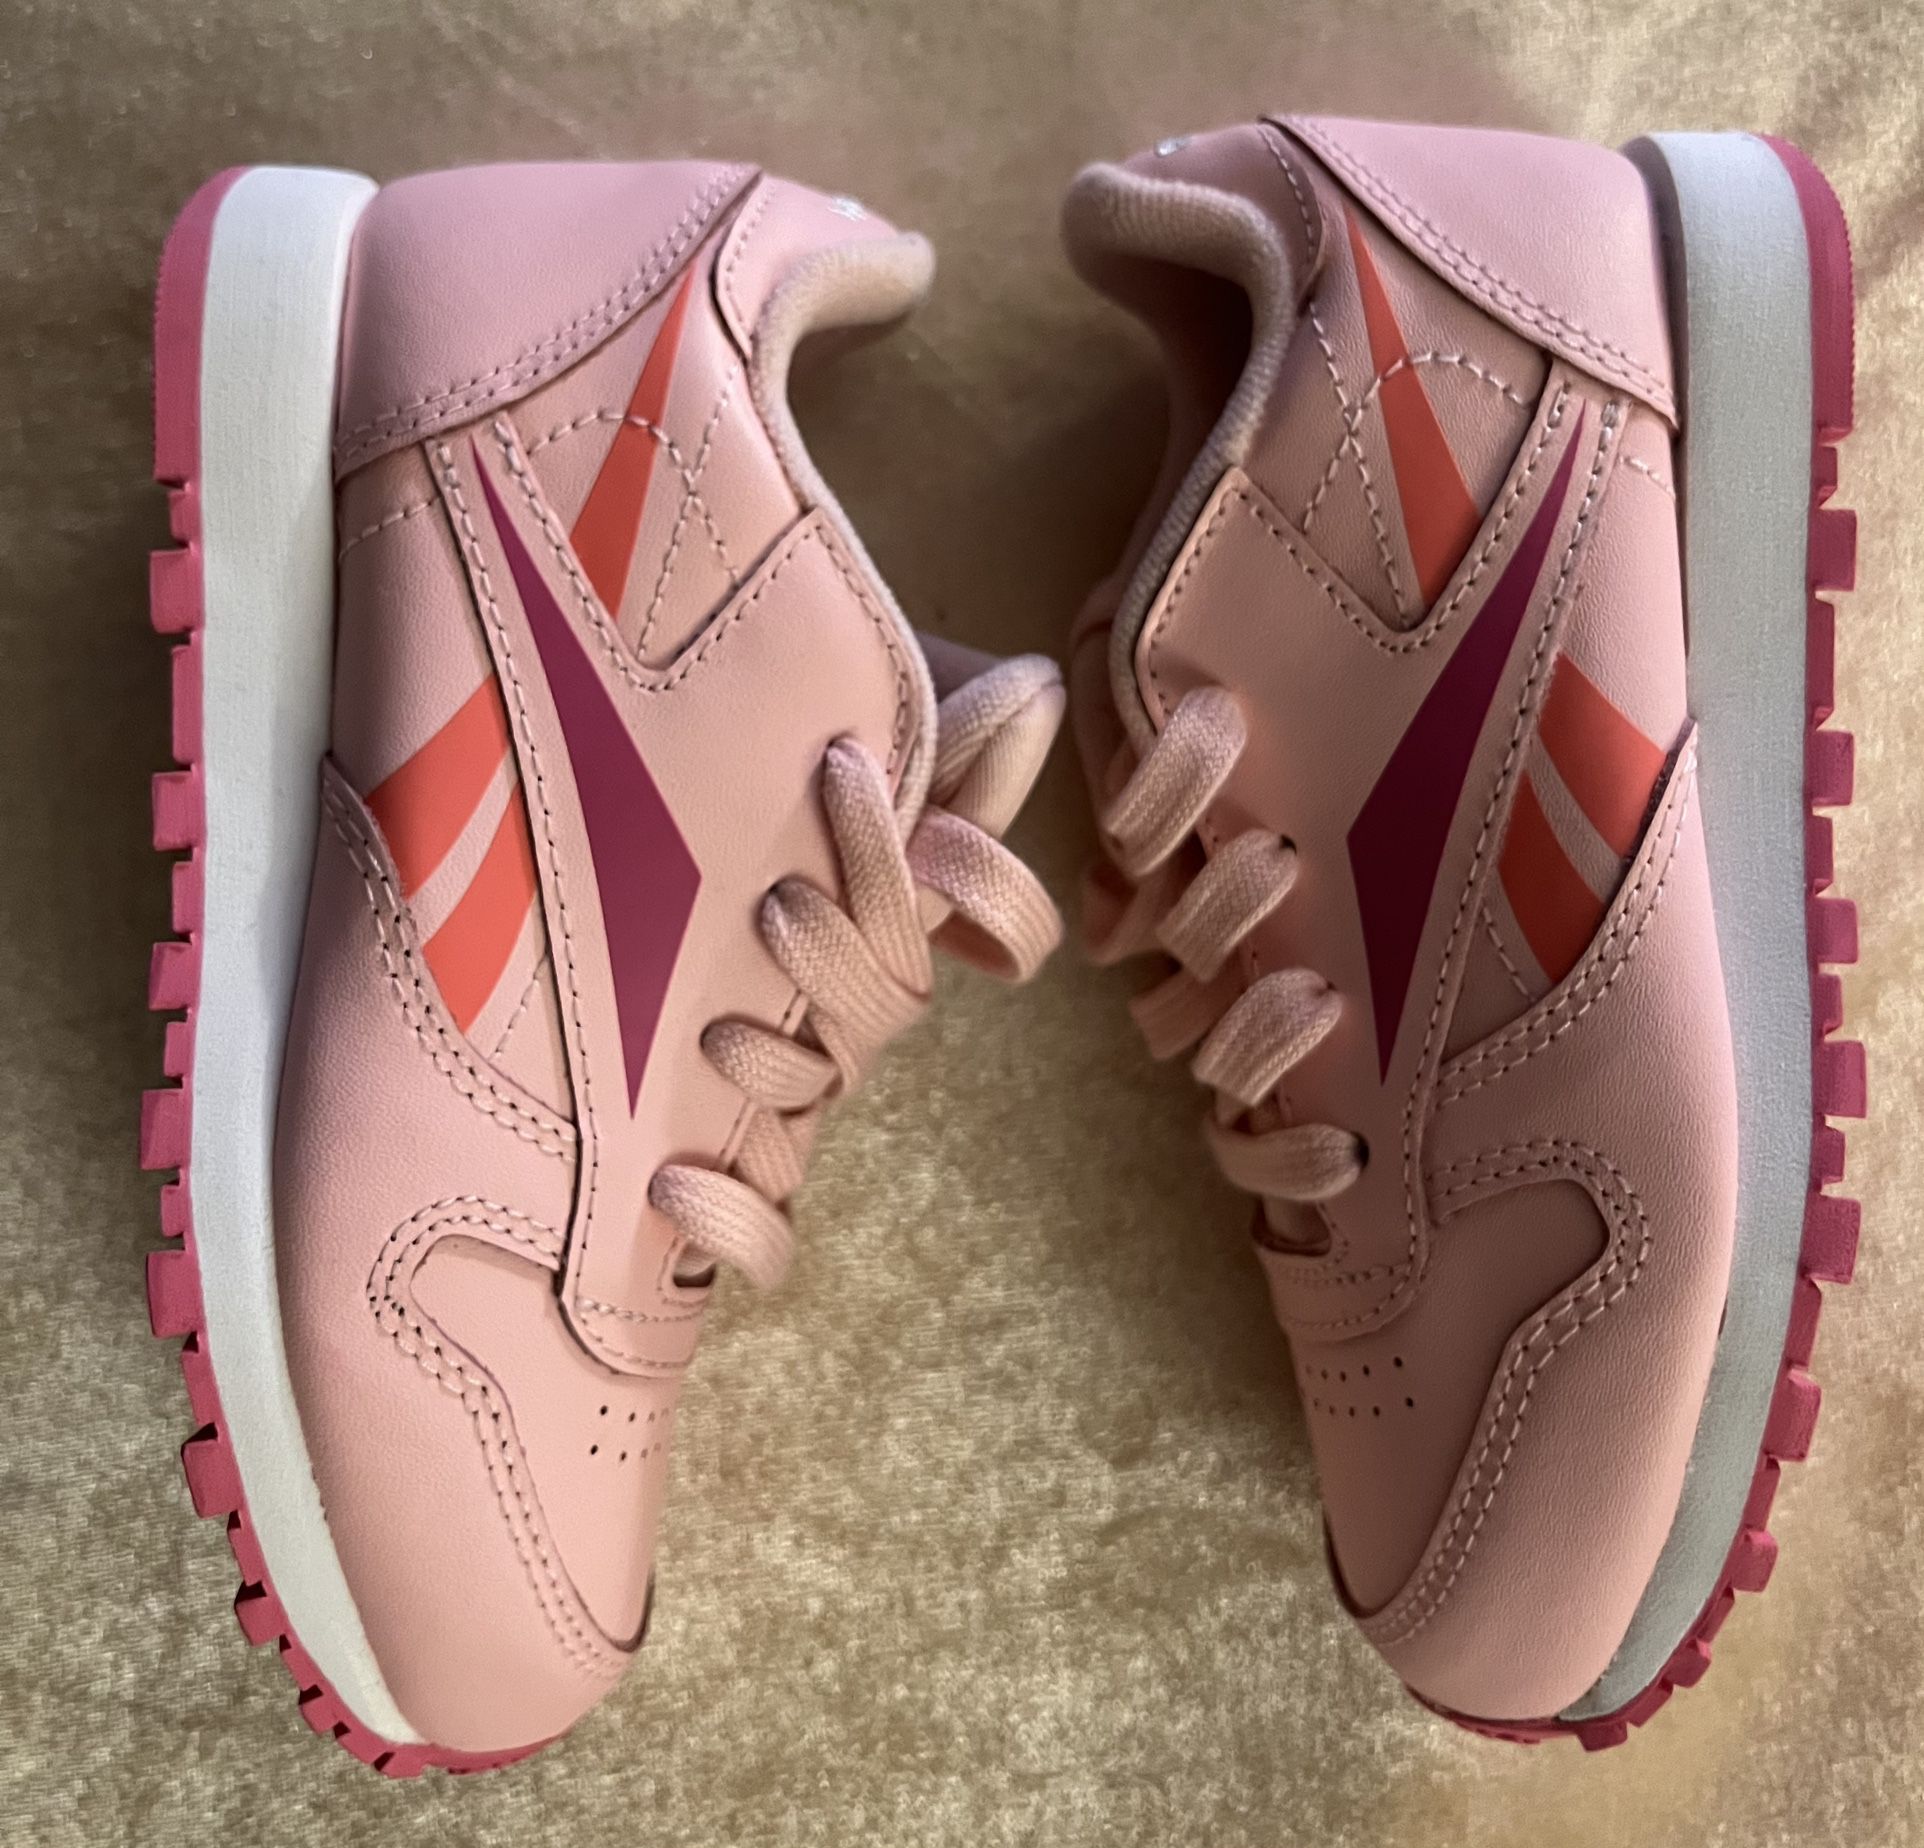 Tricolor Pink Reebok Sneakers Toddler Girls Size10 New W/o Box